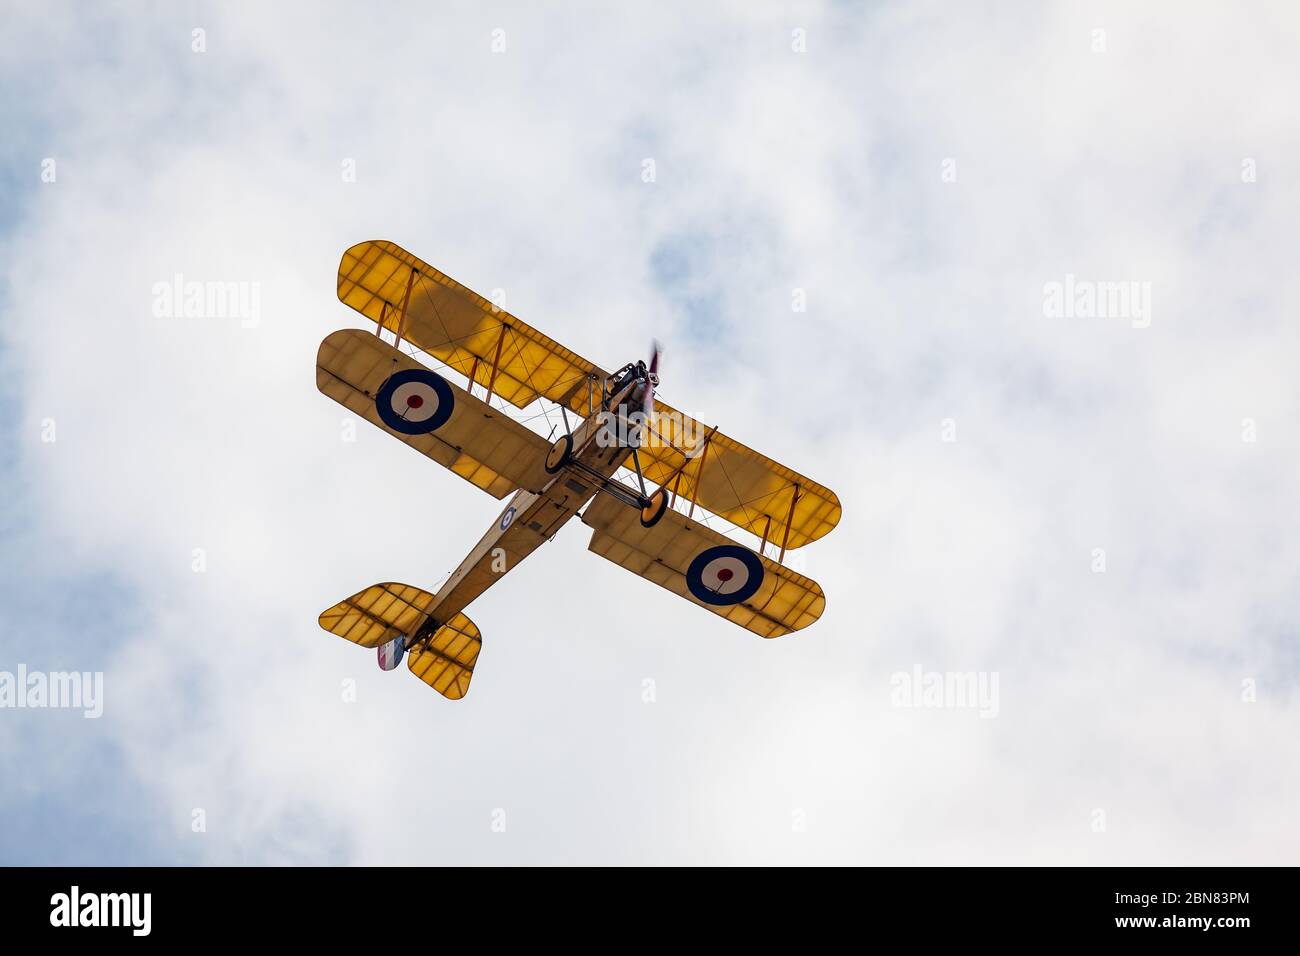 Bremont Great War Display Team BE2c RIAT, Fairford 2018 Stock Photo